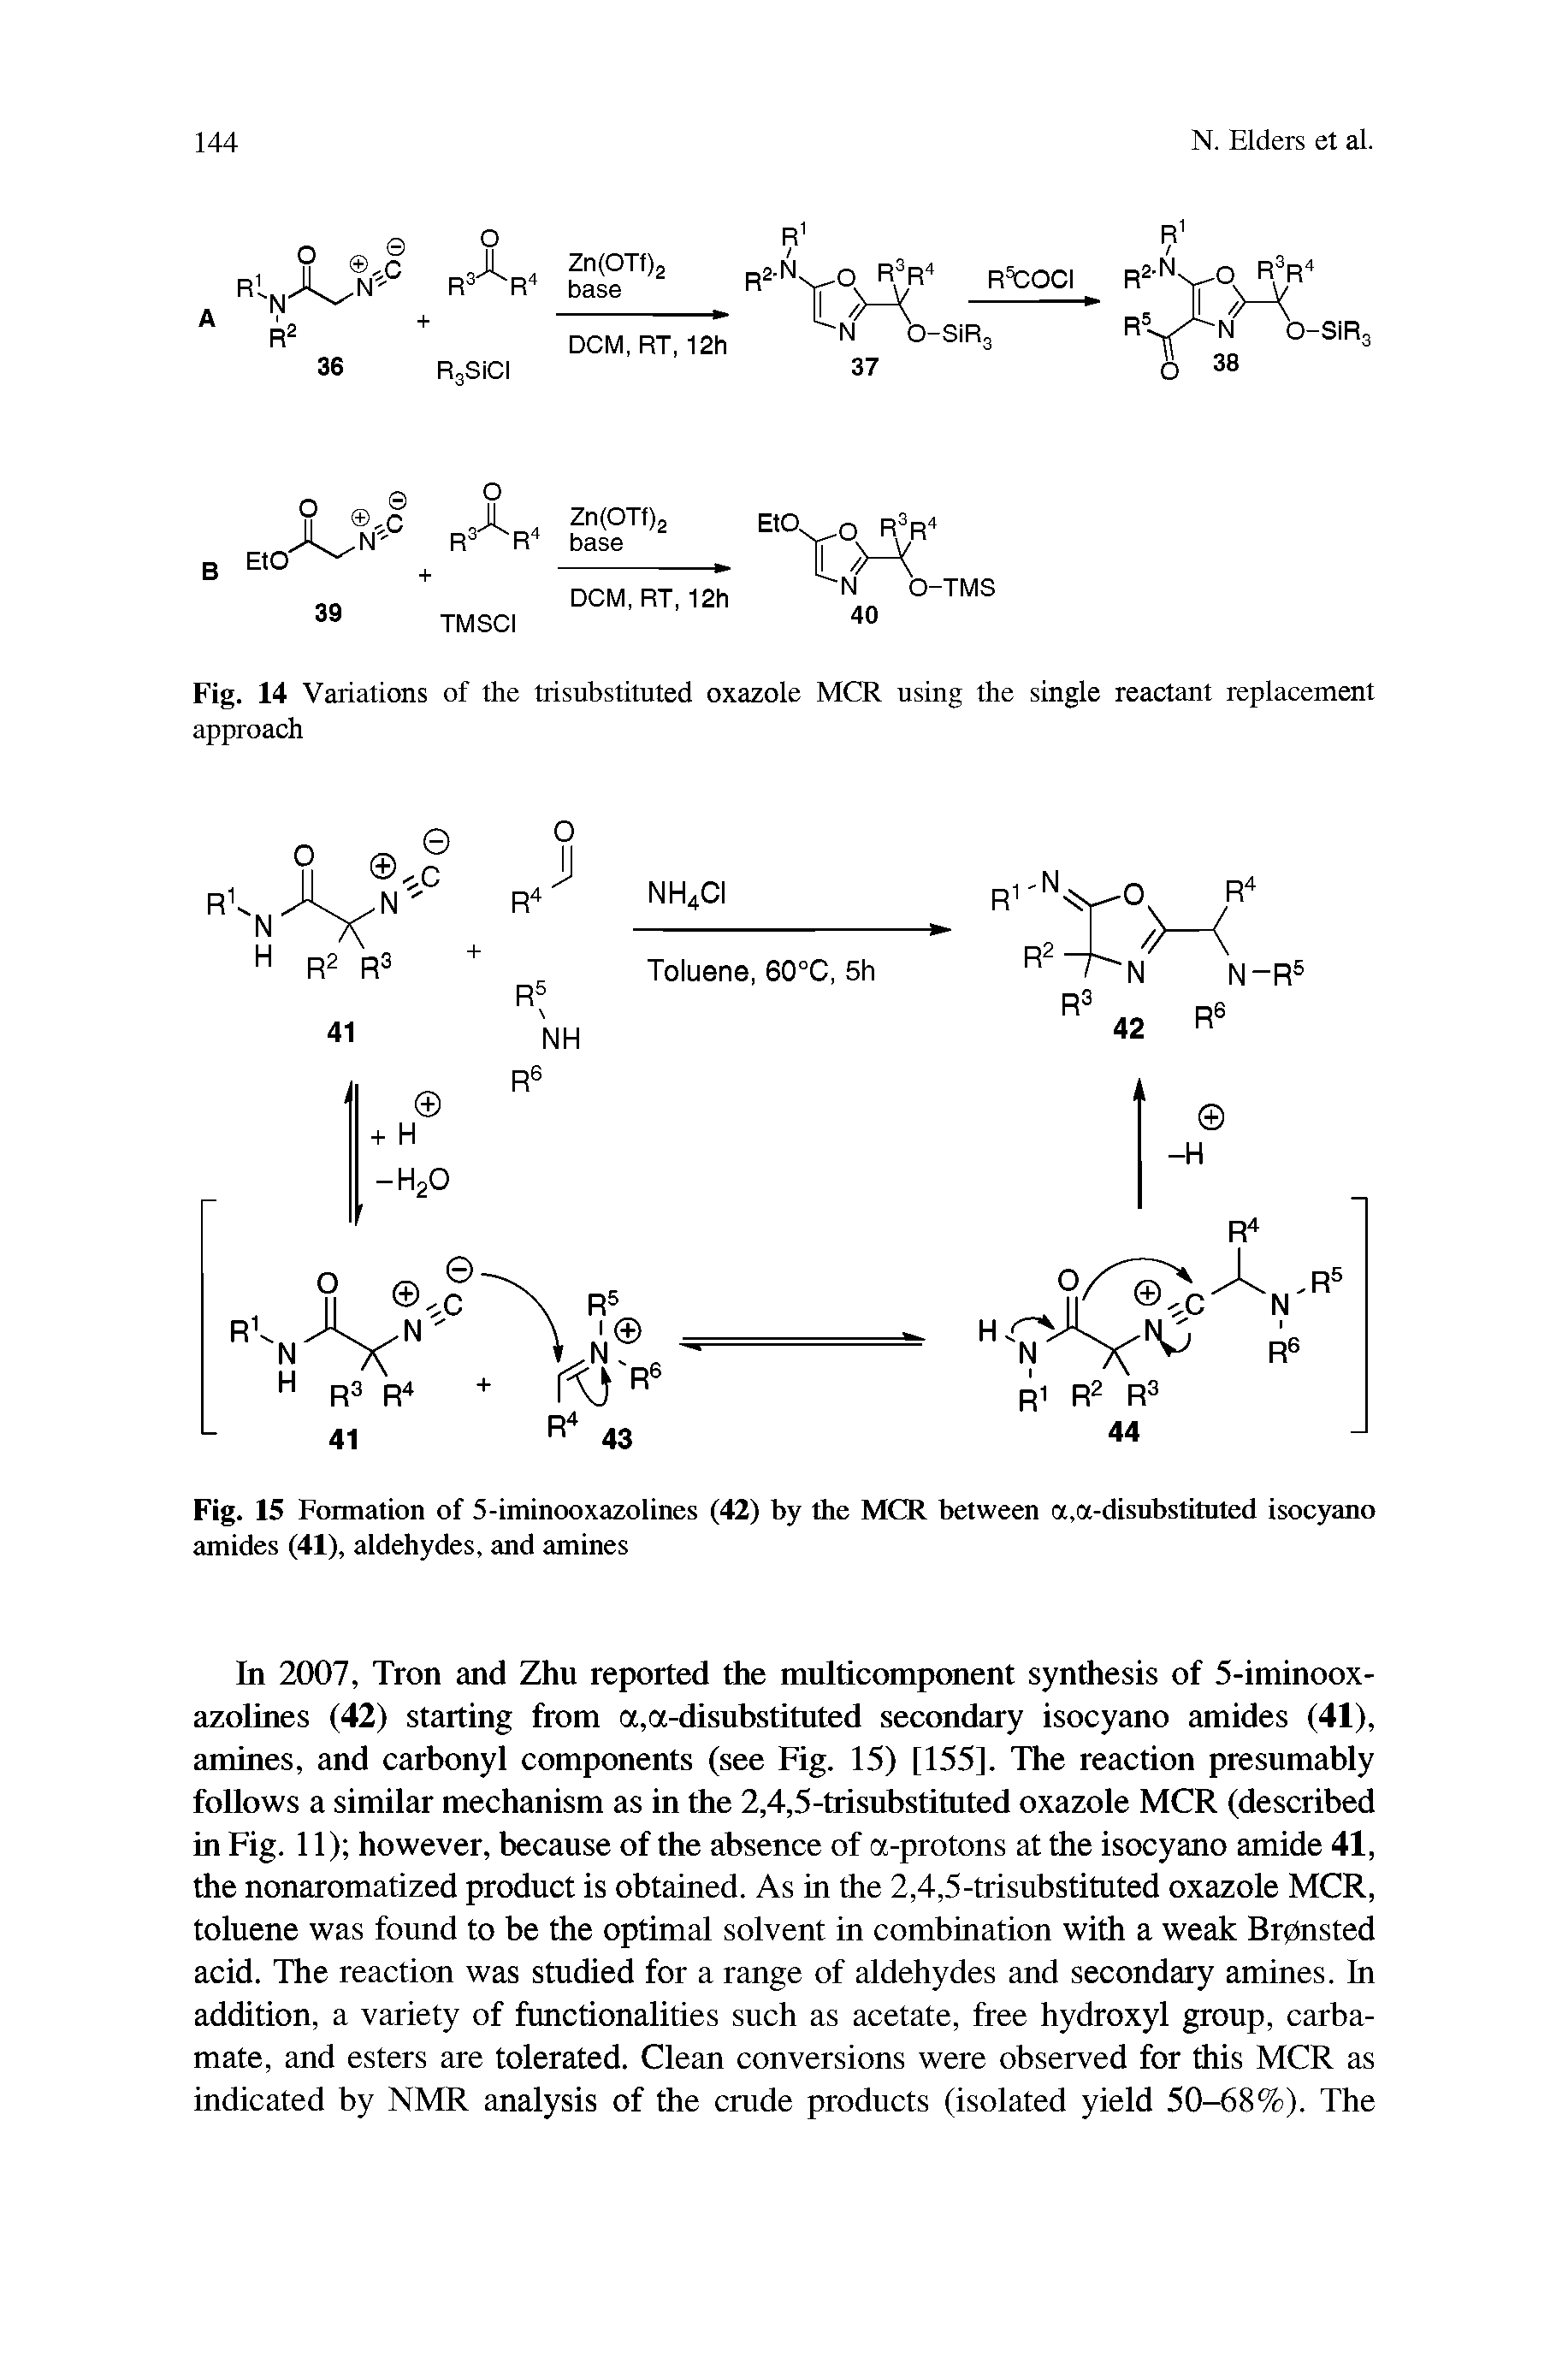 Fig. 15 Formation of 5-iminooxazolines (42) by the MCR between a,a-disubstituted isocyano amides (41), aldehydes, and amines...